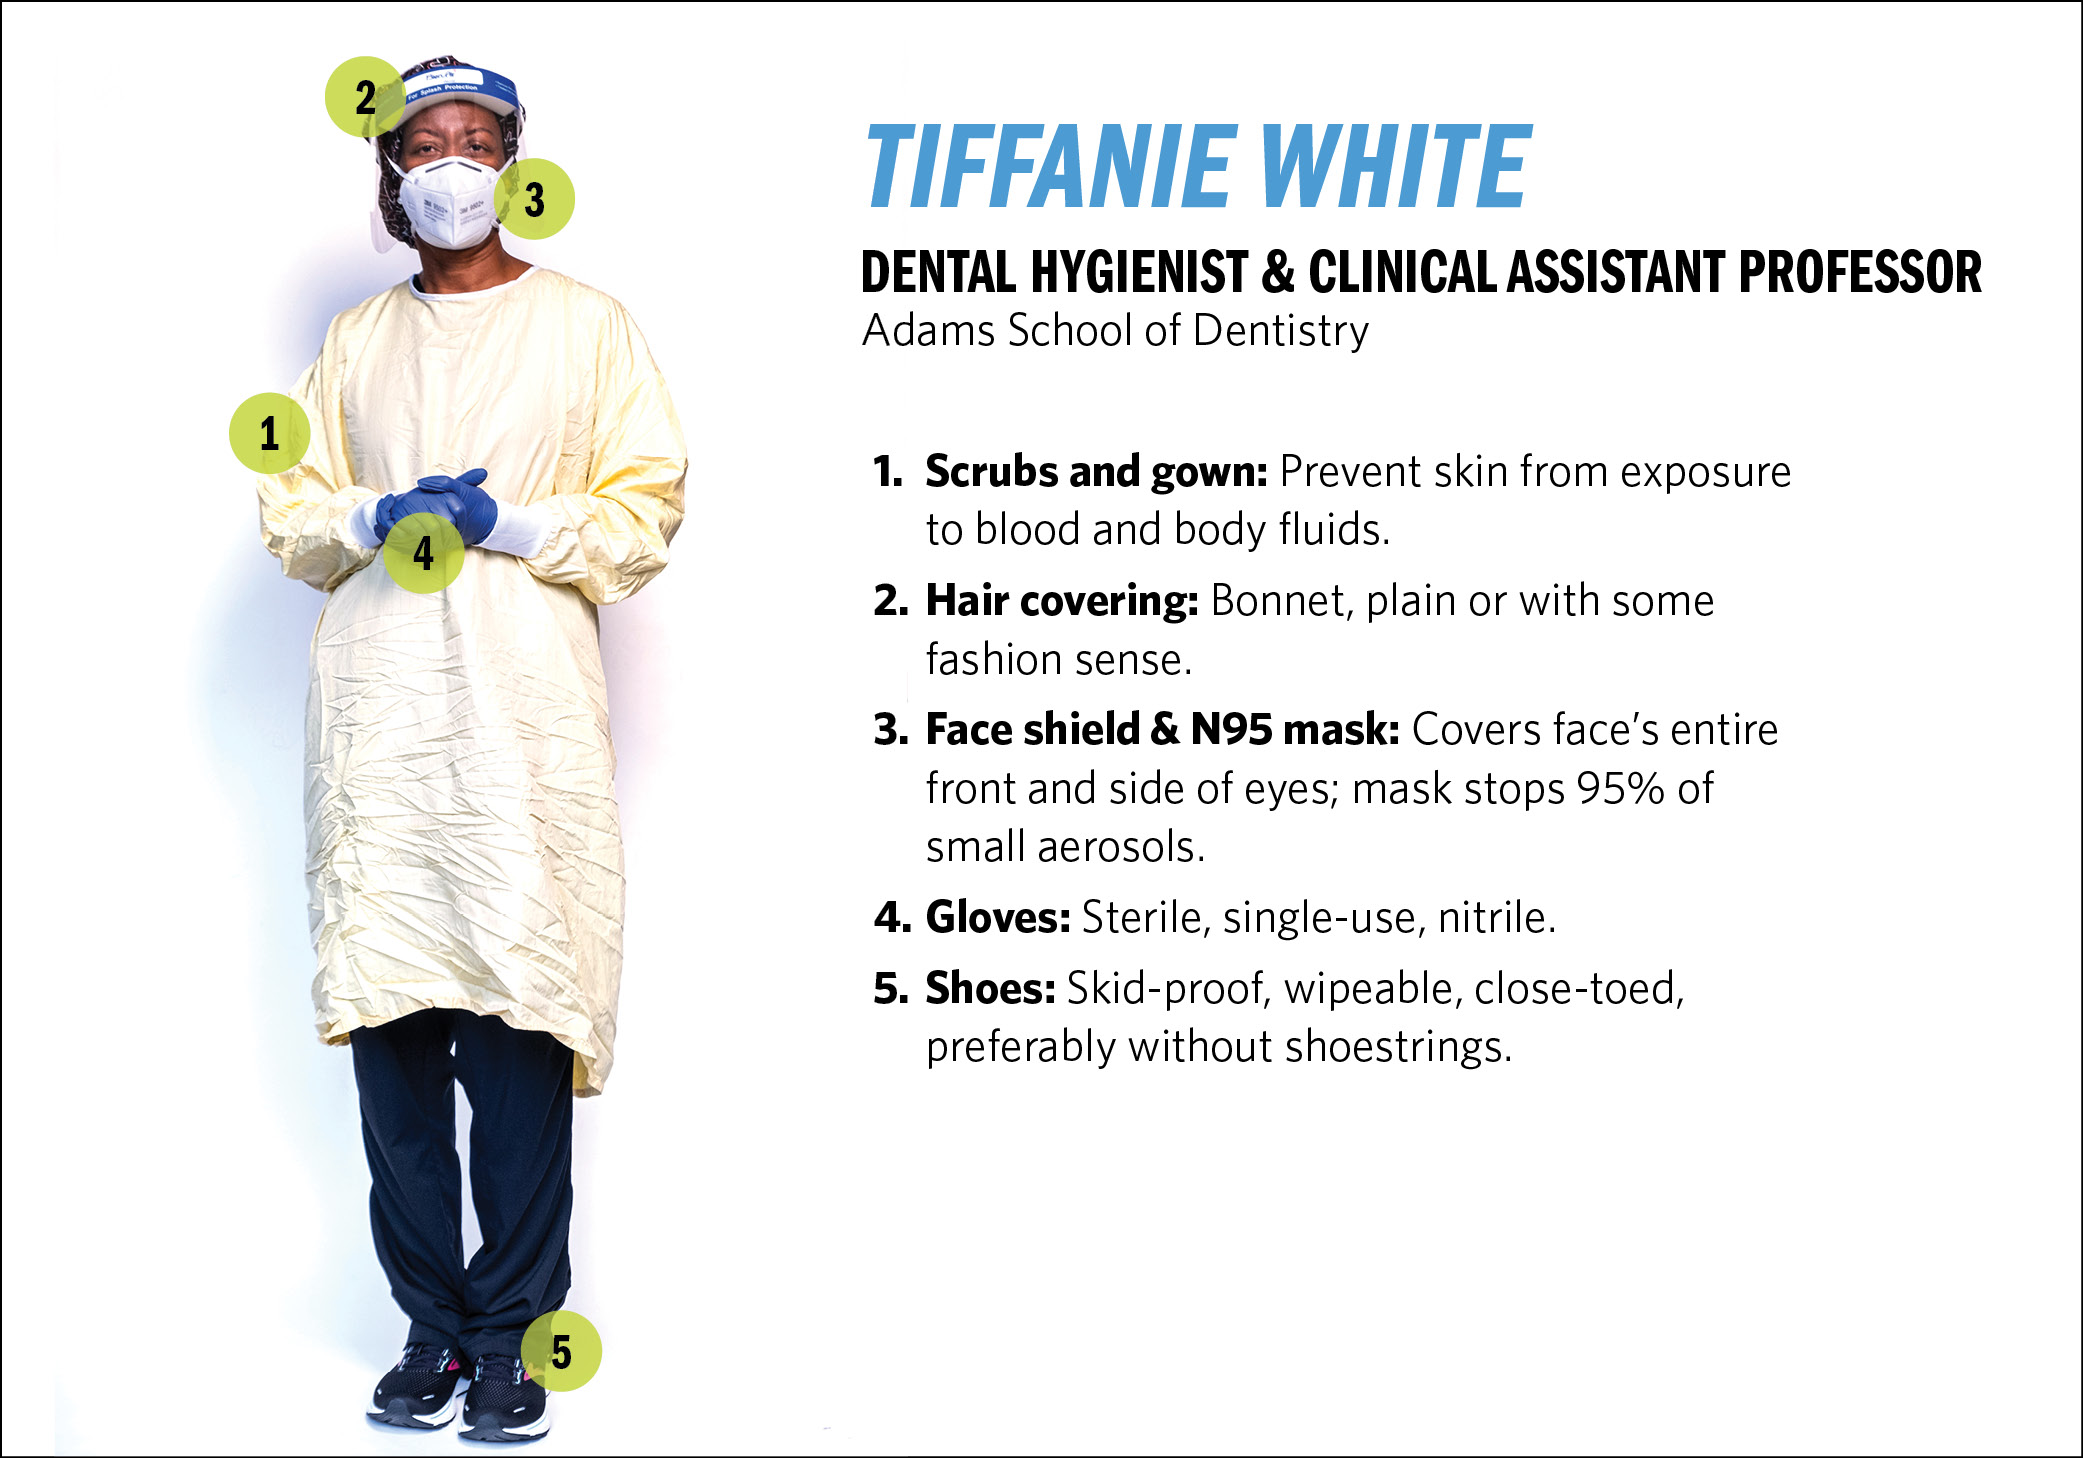 Dental hygienist and clinical assistant professor Tiffanie White. Scrubs, gown, non-skid shoes without laces, bonnet, face shield, N95 mask, sterile one-use nitrile gloves.